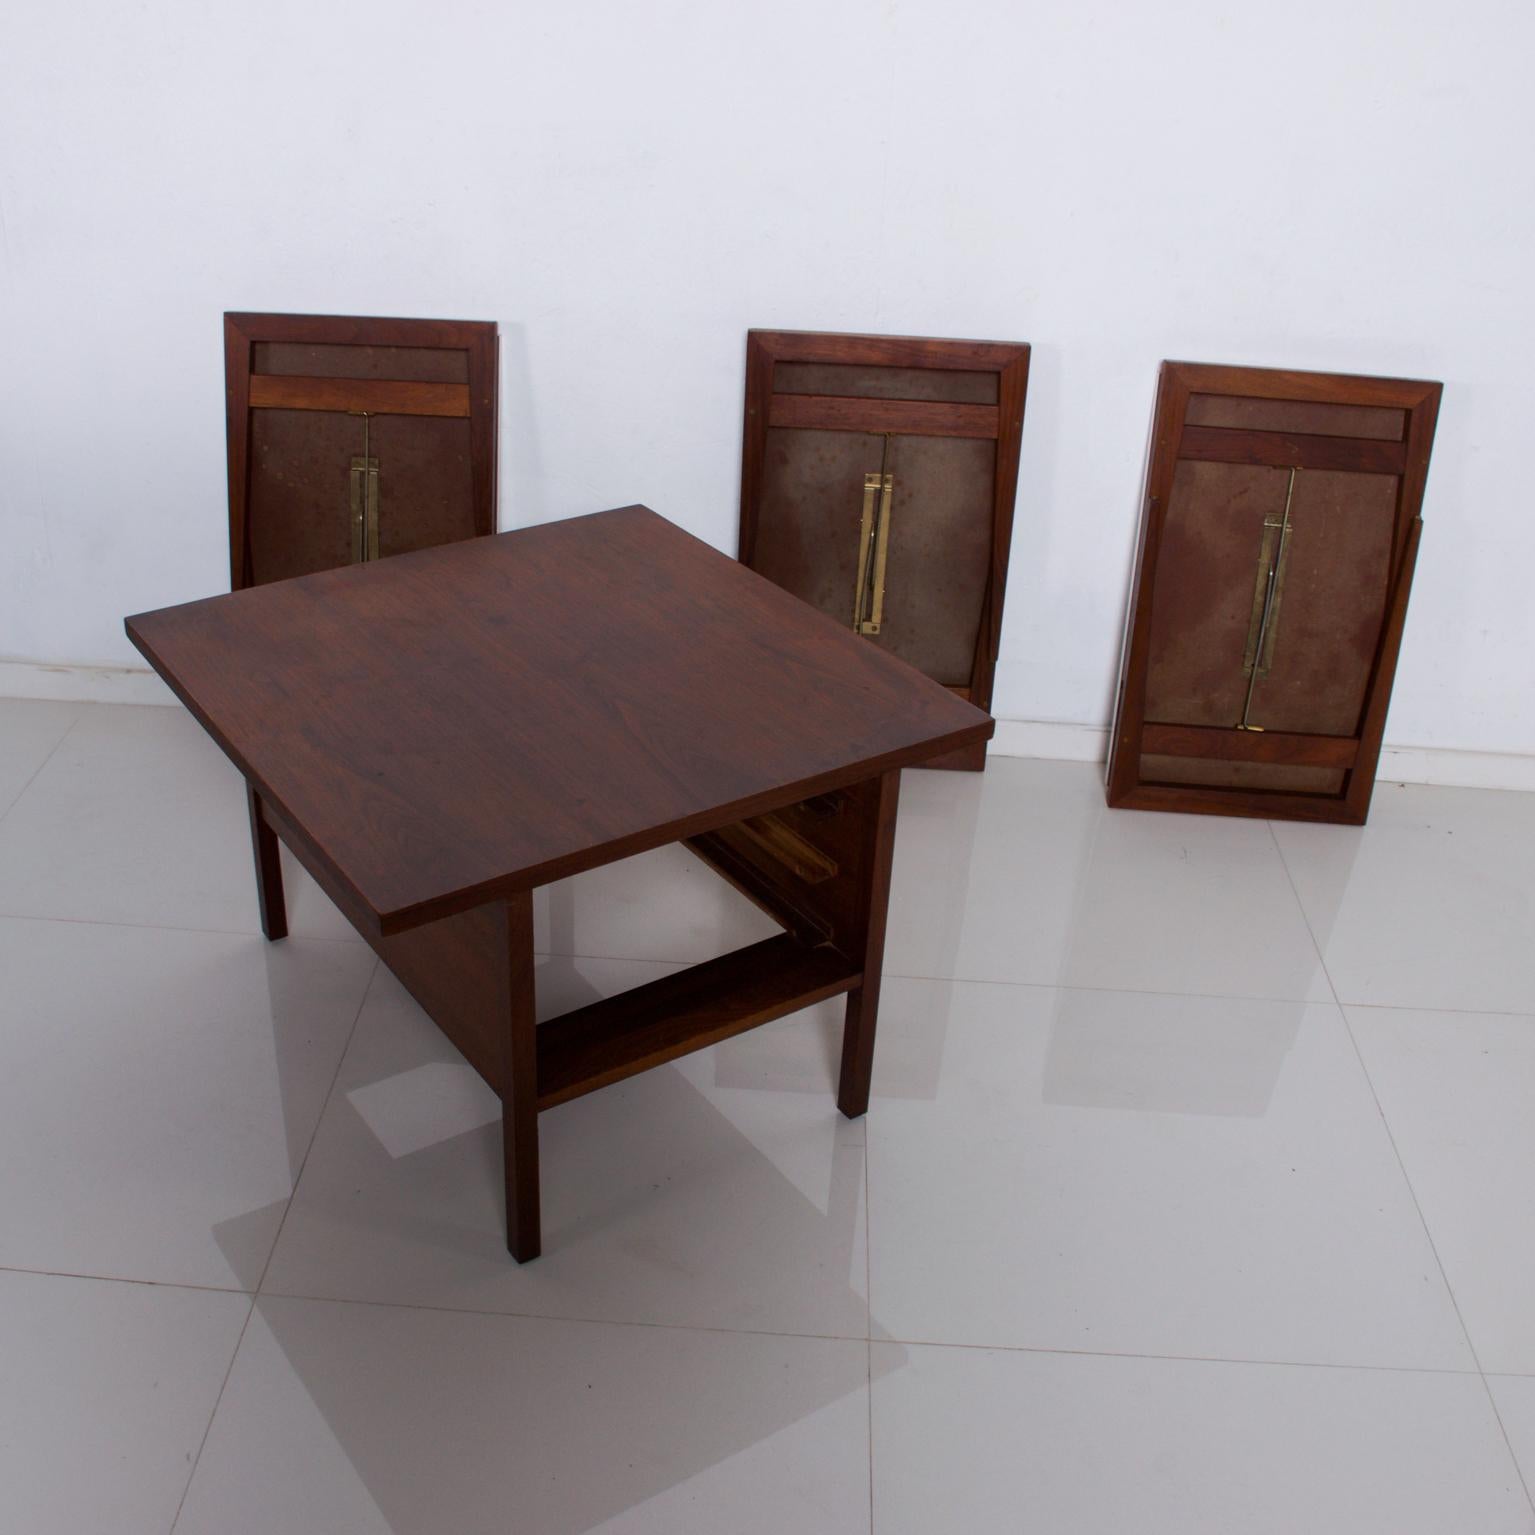 Walnut Coffee Table w/ Nesting Side Tables by John Keal for Brown Saltman 1960s 1